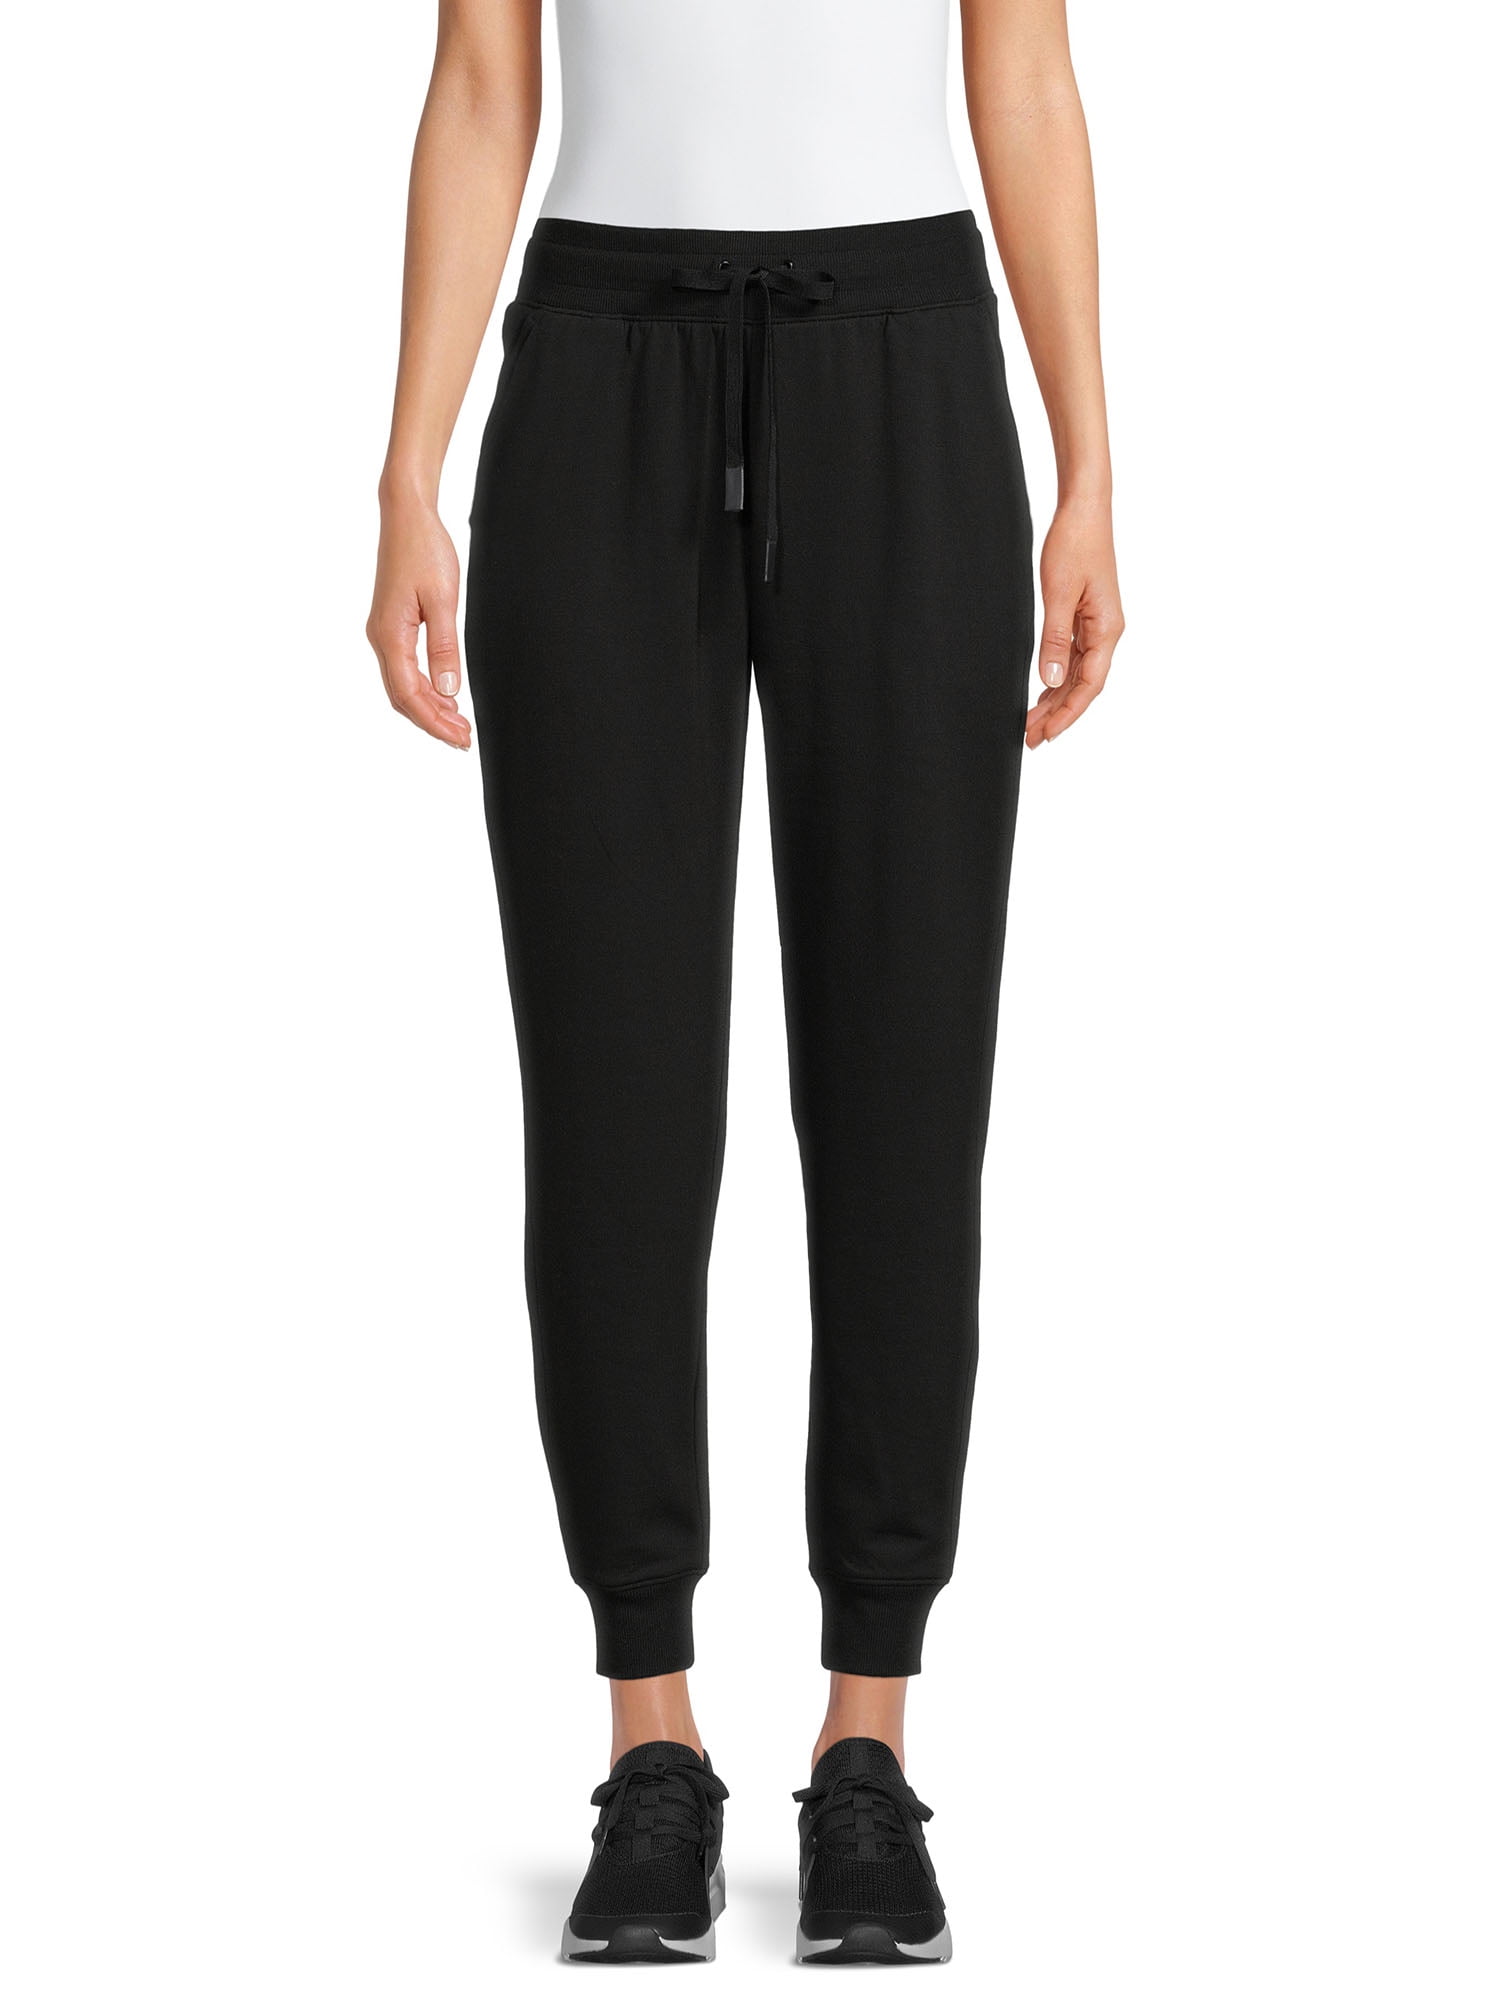 Athletic Works Women's Soft Joggers